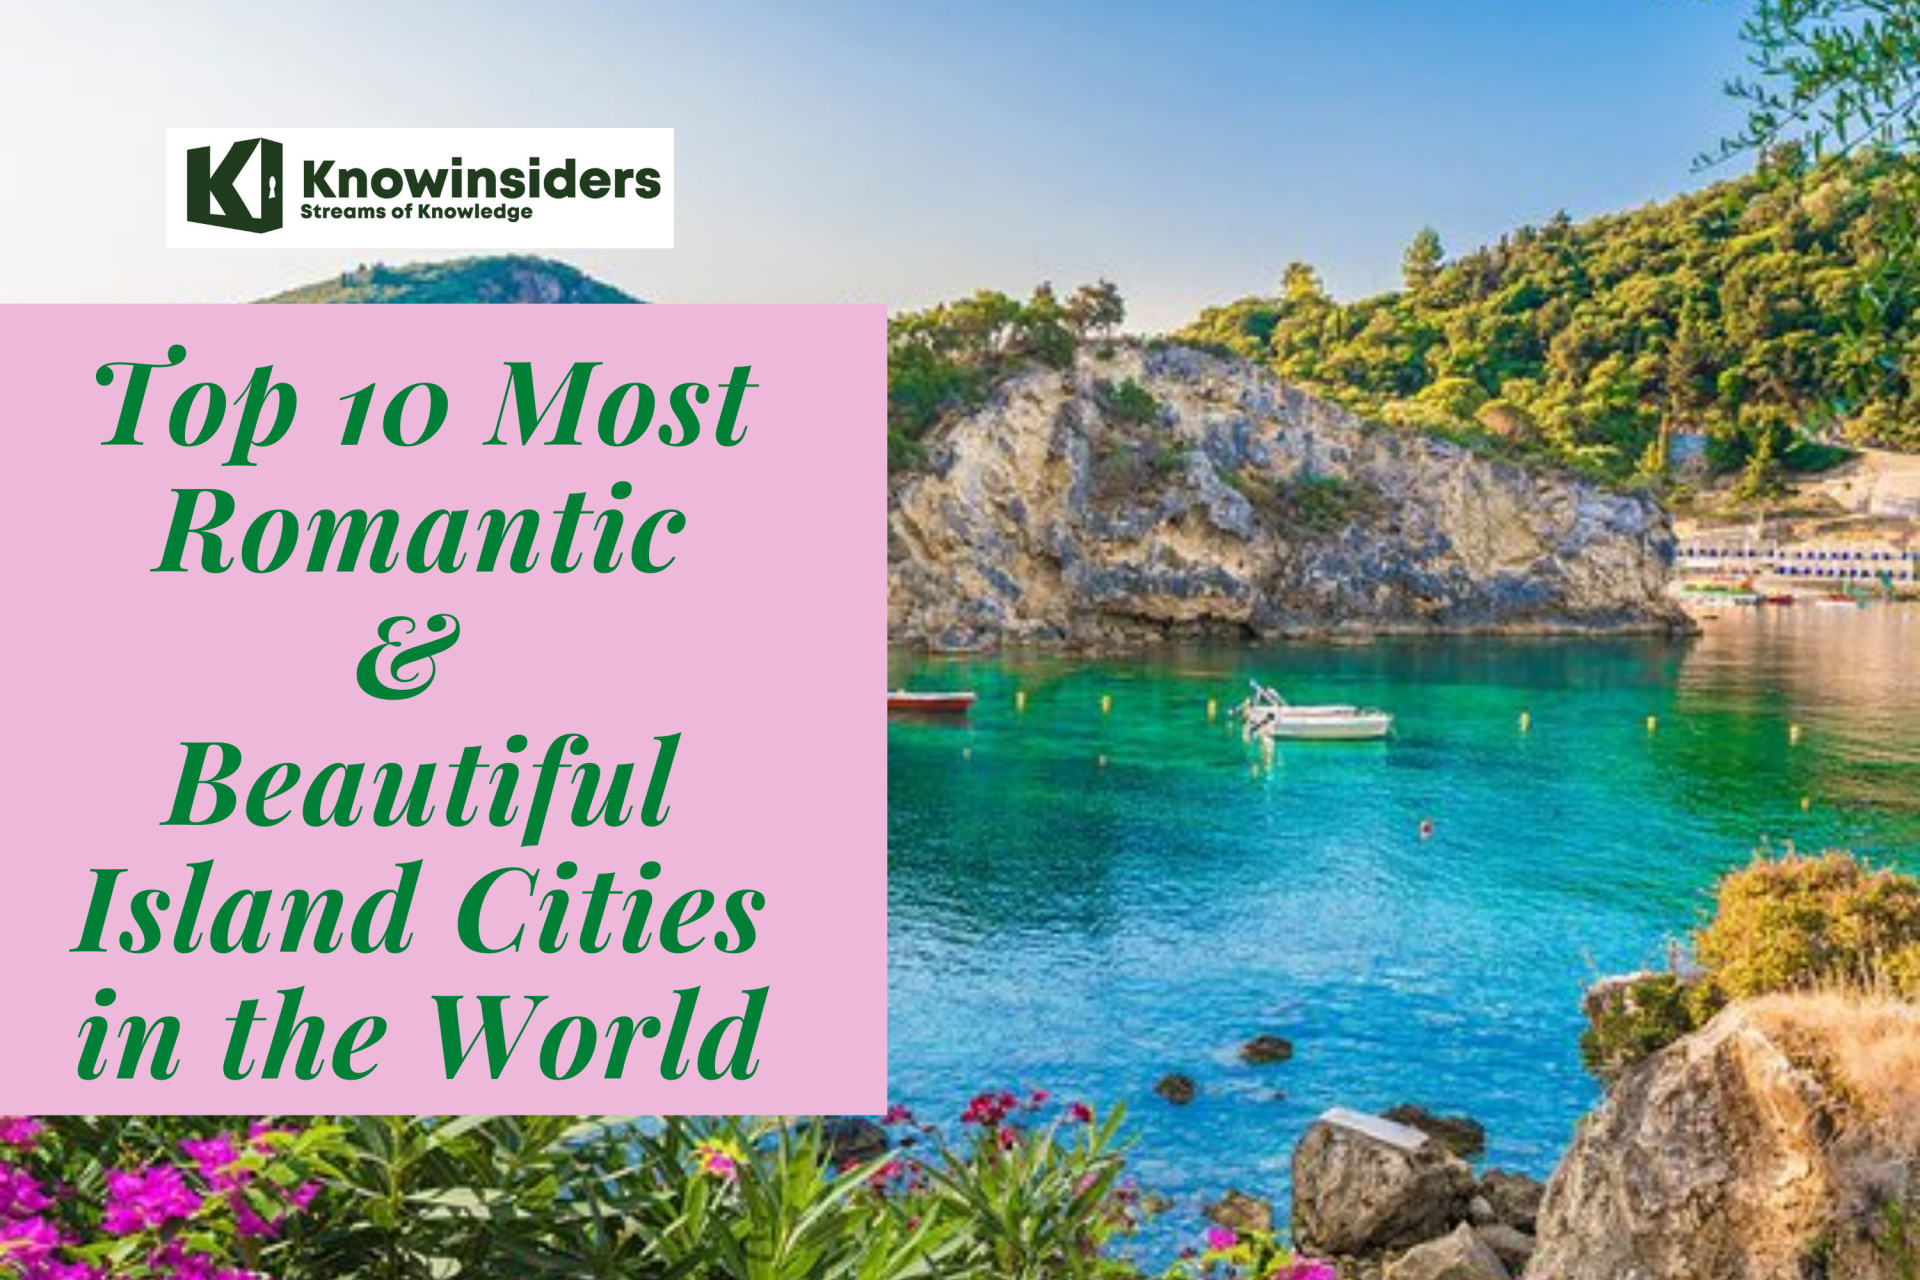 10 Most Romantic & Beautiful Island Cities in the World